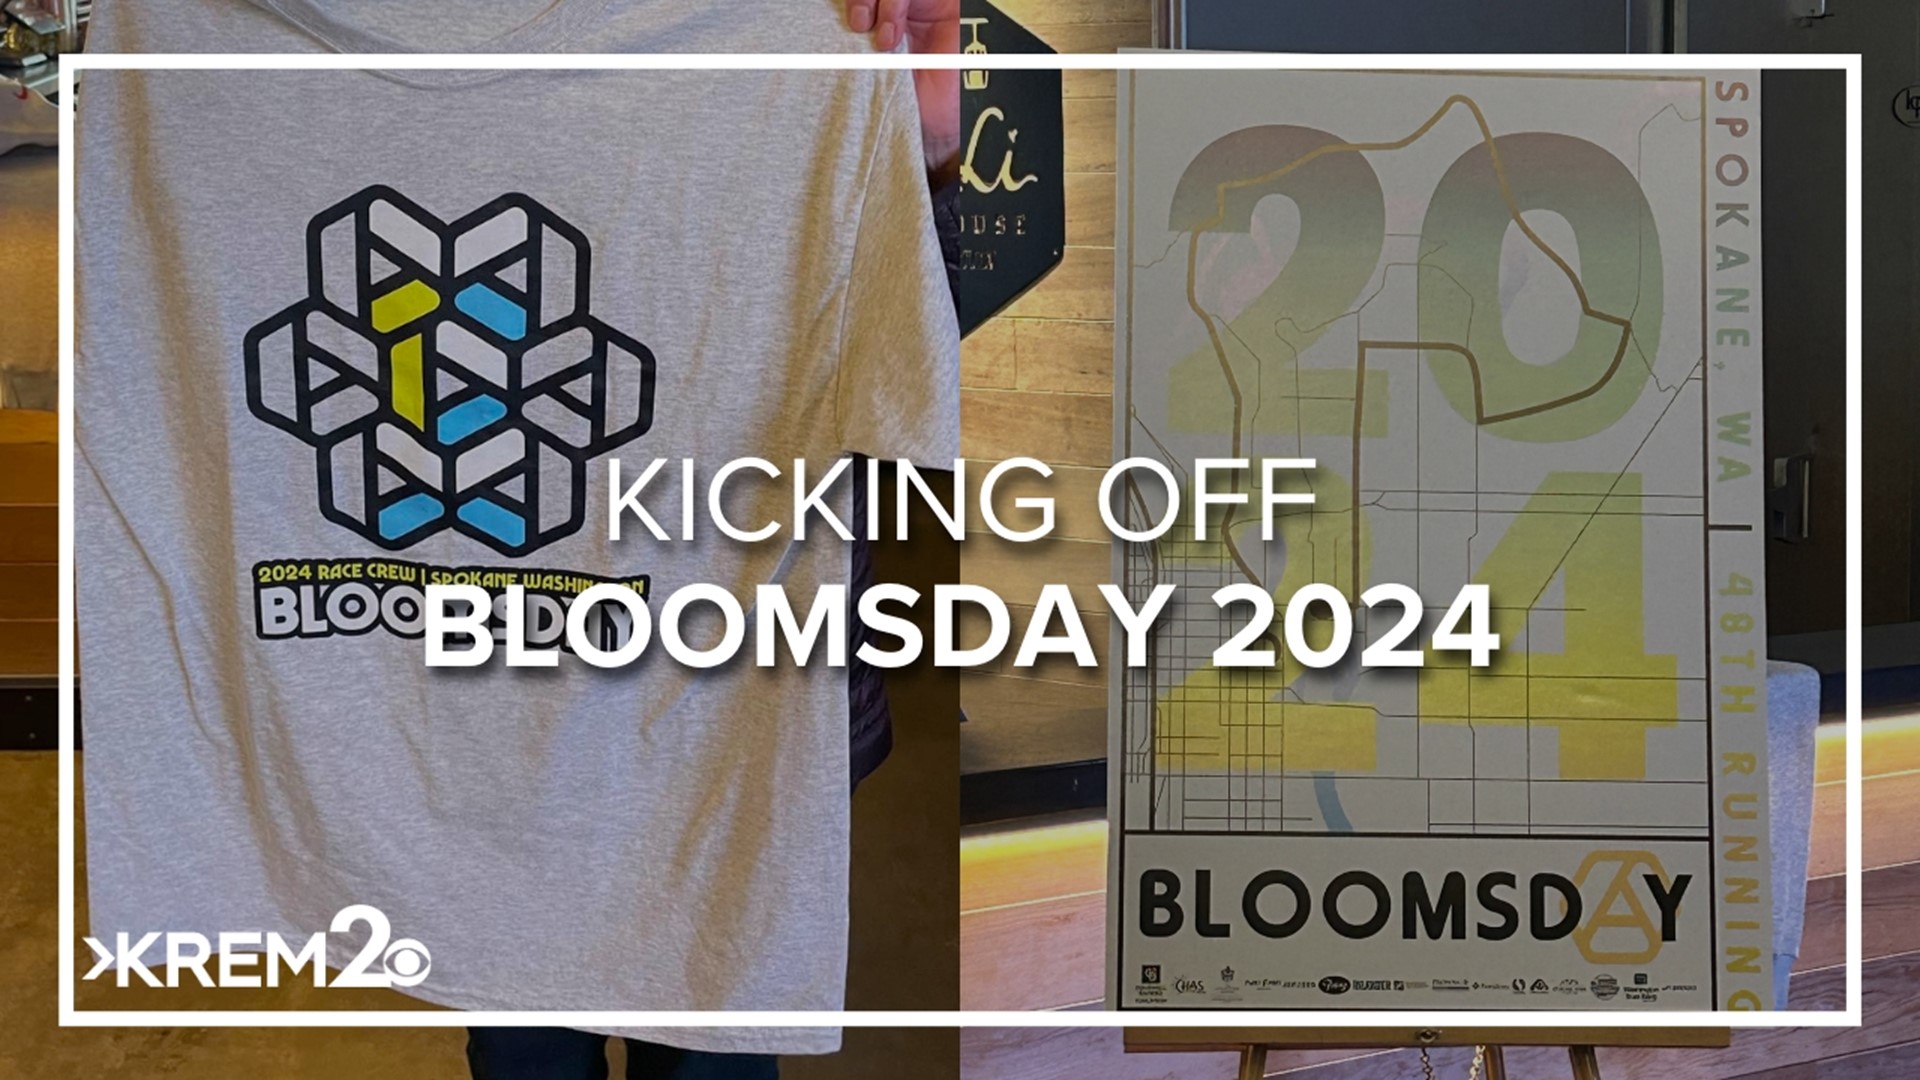 The Lilac Bloomsday Association unveiled a number of sneak peeks ahead of Bloomsday 48, including a T-shirt design.